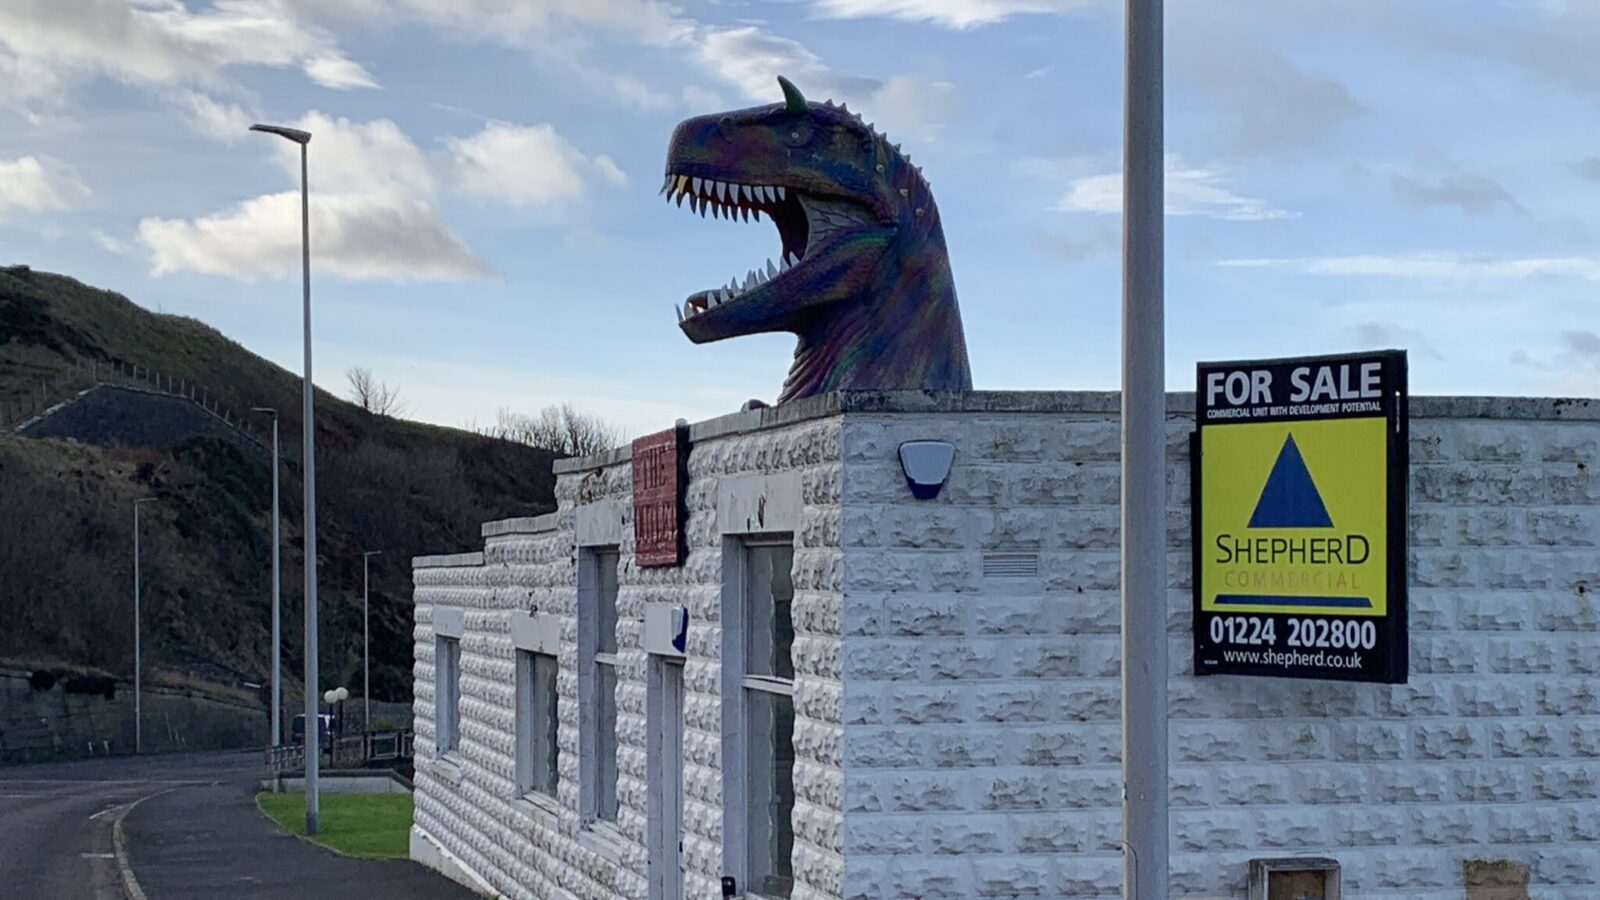 Landmark dinosaur building in Cullen to go under the hammer at Shepherd commercial property auction